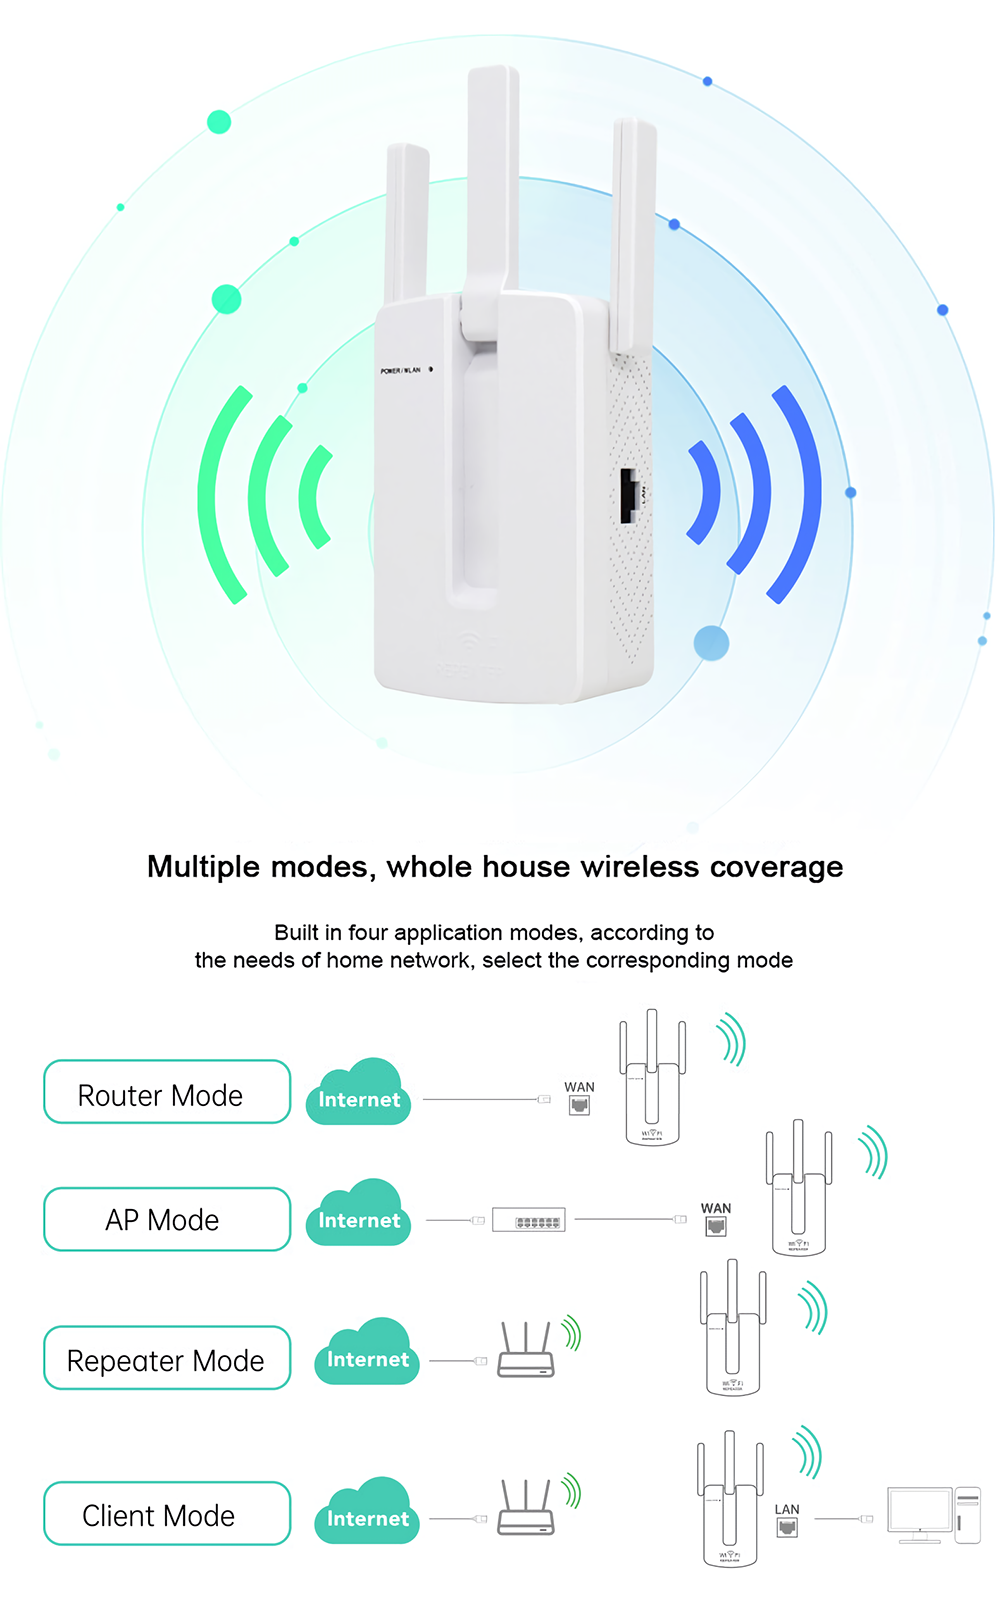 AC-1200M-Dual-Band-Wireless-AP-Repeater-WiFi-Signal-Amplifier-24GHz-5GHz-Router-Range-Extender-WiFi--1744820